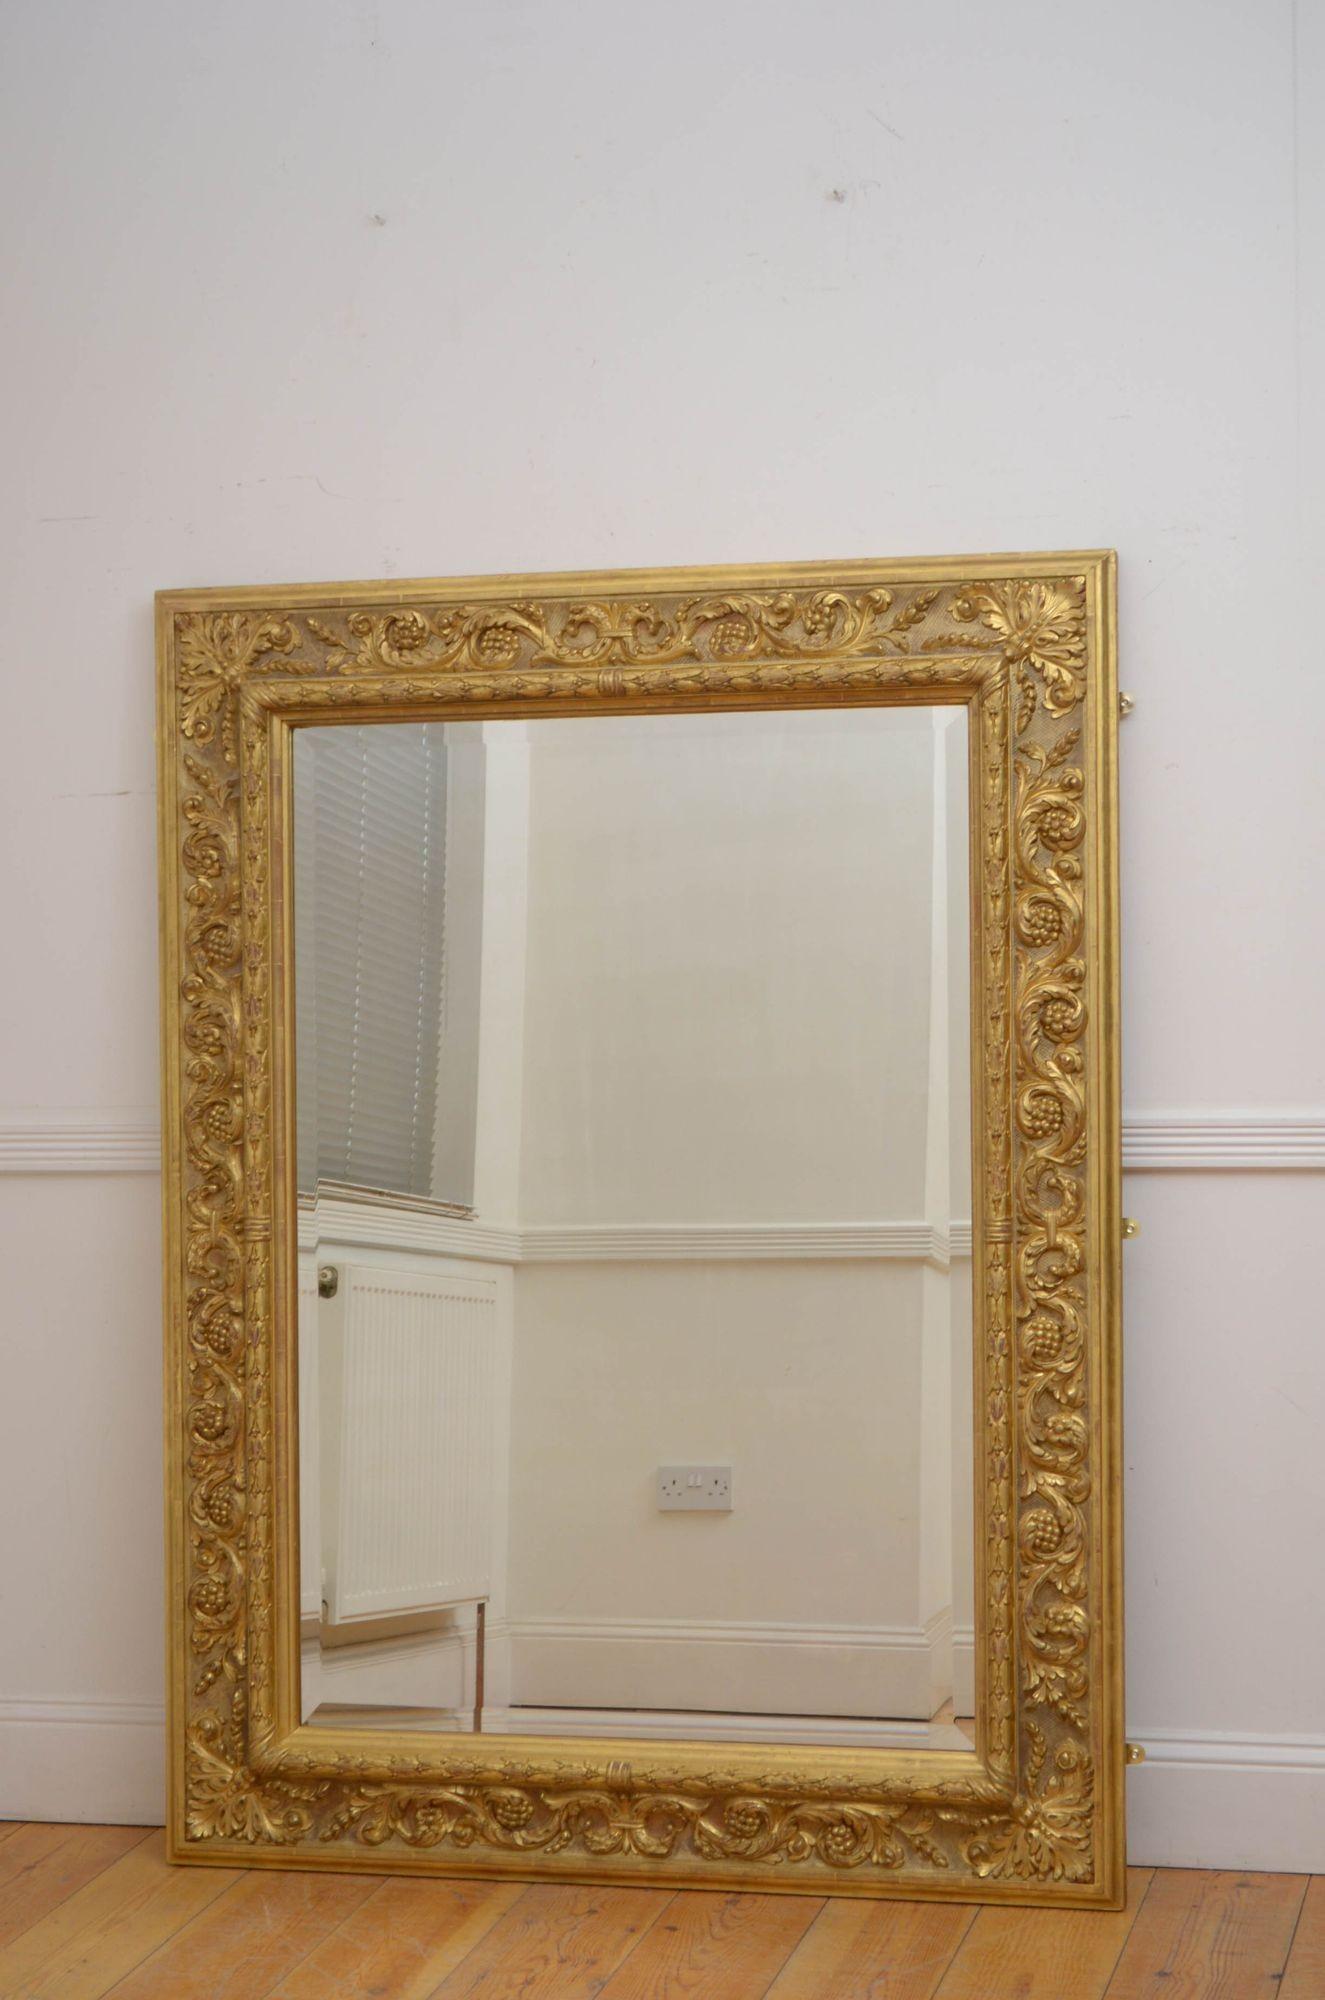 Sn5438  Superb XIXth century gilded wall mirror which can be positioned horizontally or vertically, having original bevelled edge mirror with minor imperfection in substantial gold leaf frame with carved laurel leaf, foliage scrolls and flowers, all